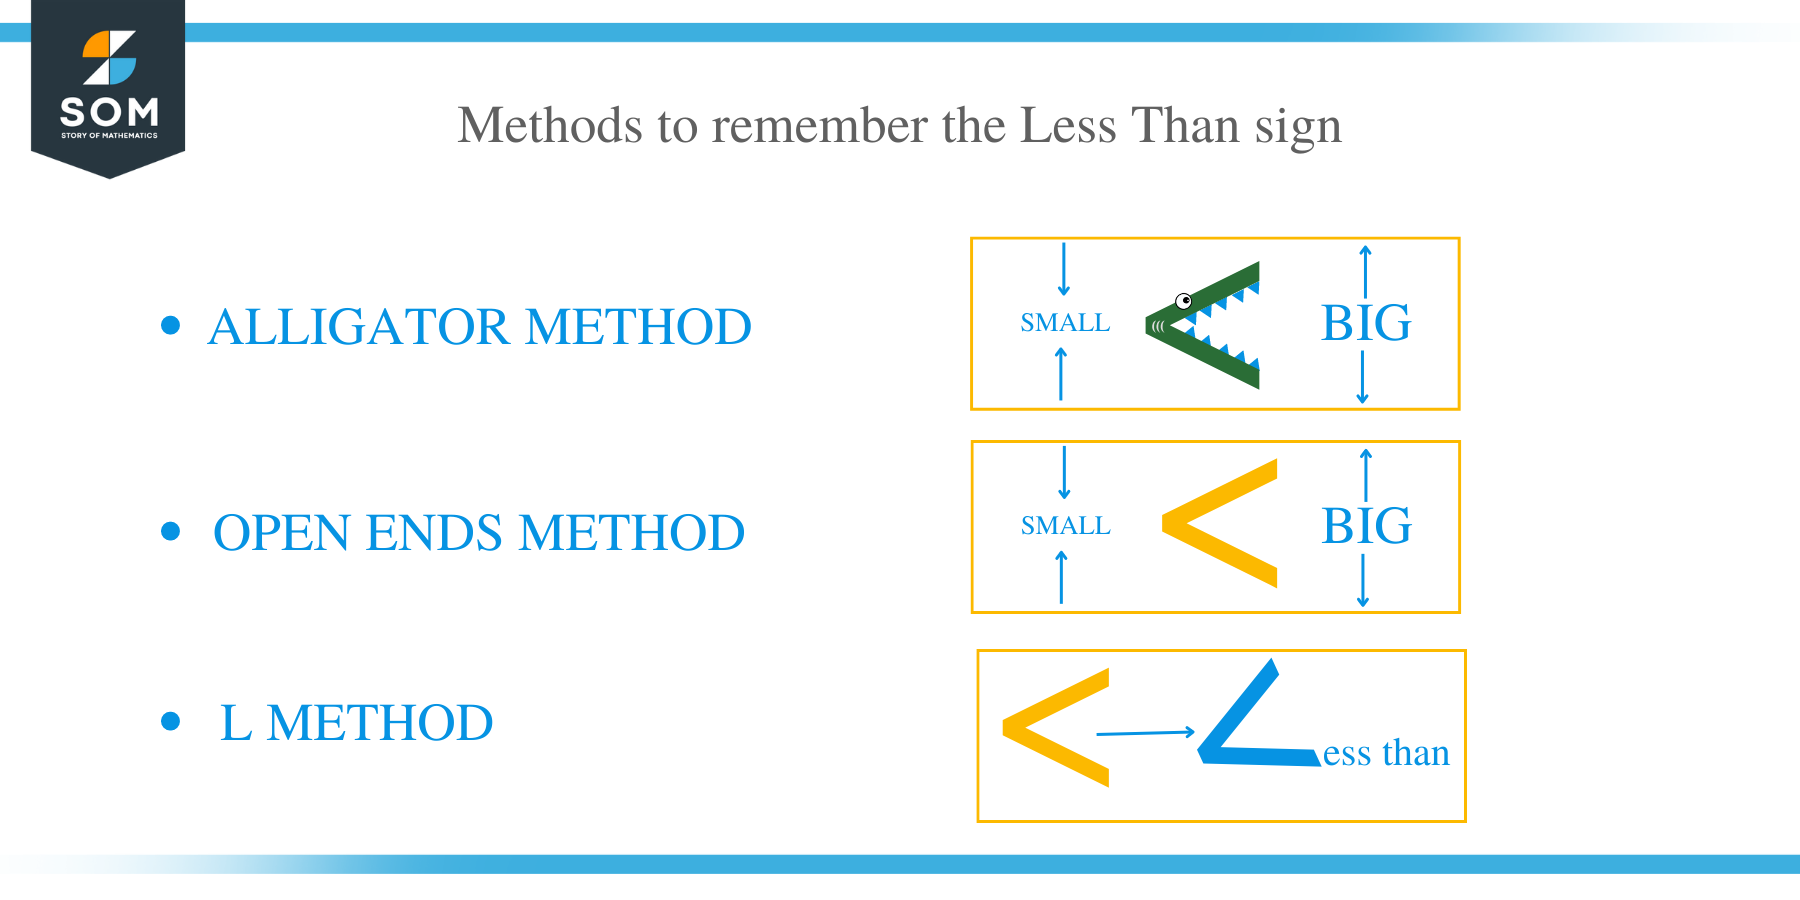 How to Remember the Less than Sign